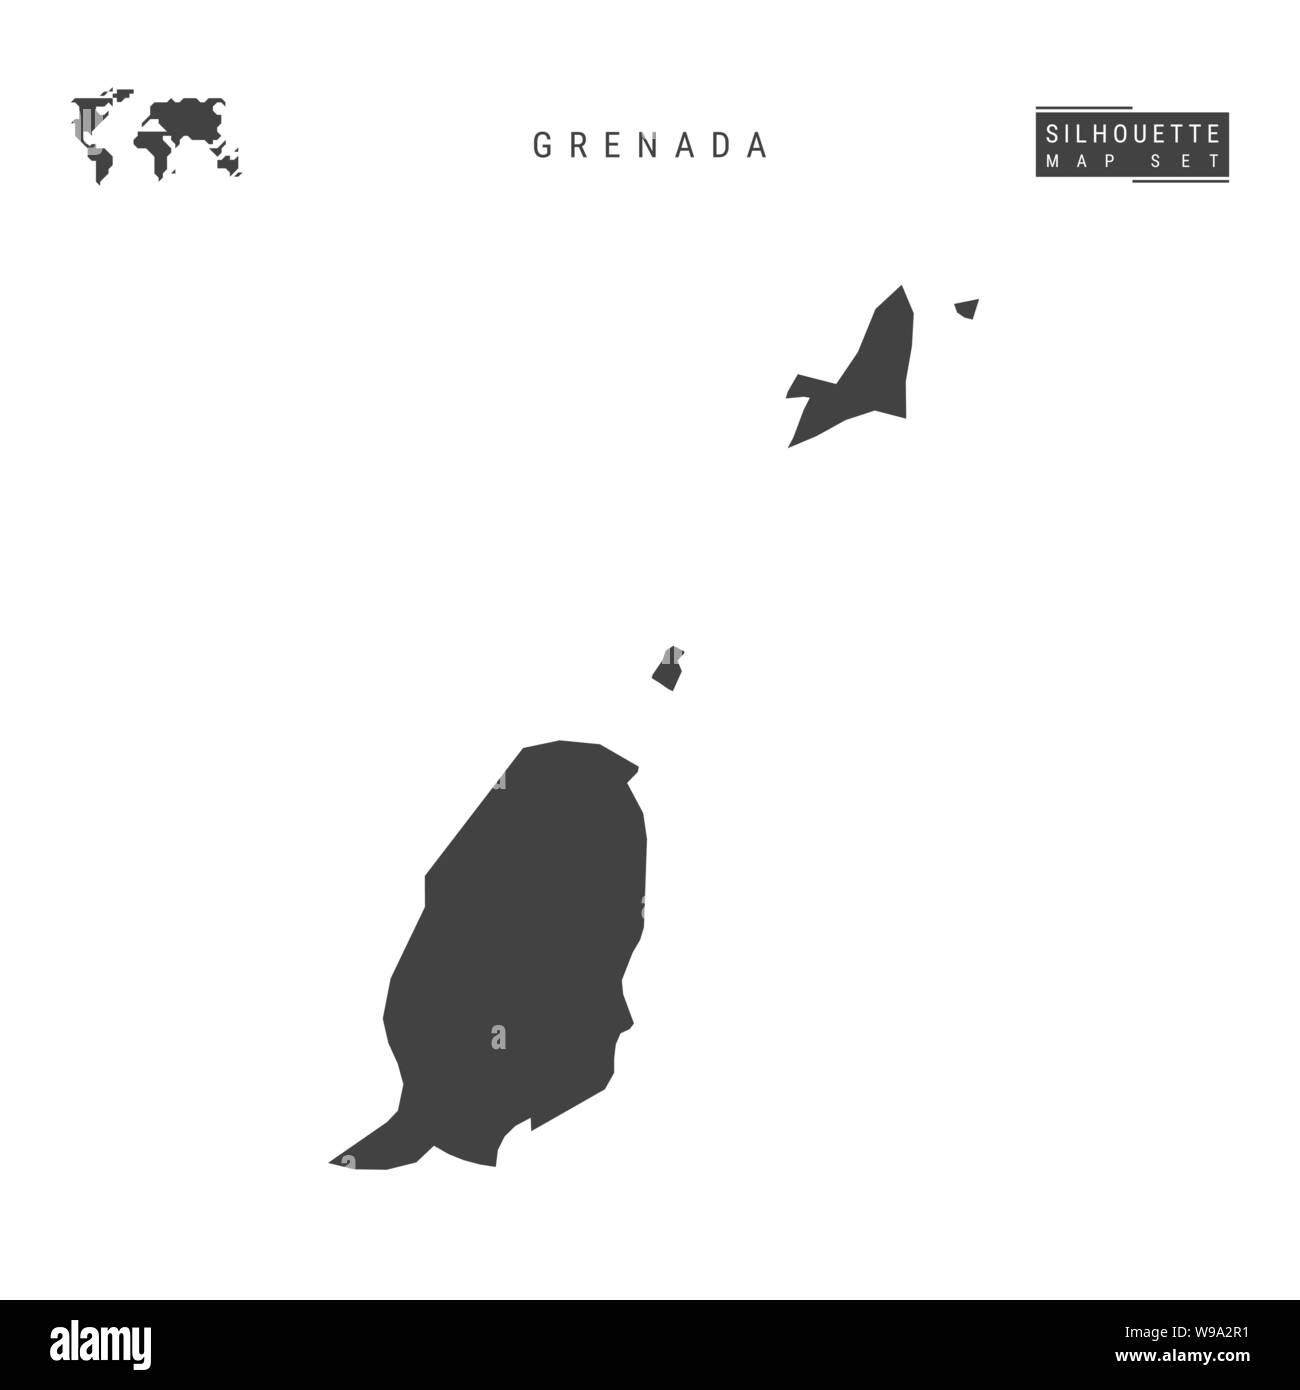 Grenada Blank Vector Map Isolated on White Background. High-Detailed Black Silhouette Map of Grenada. Stock Vector